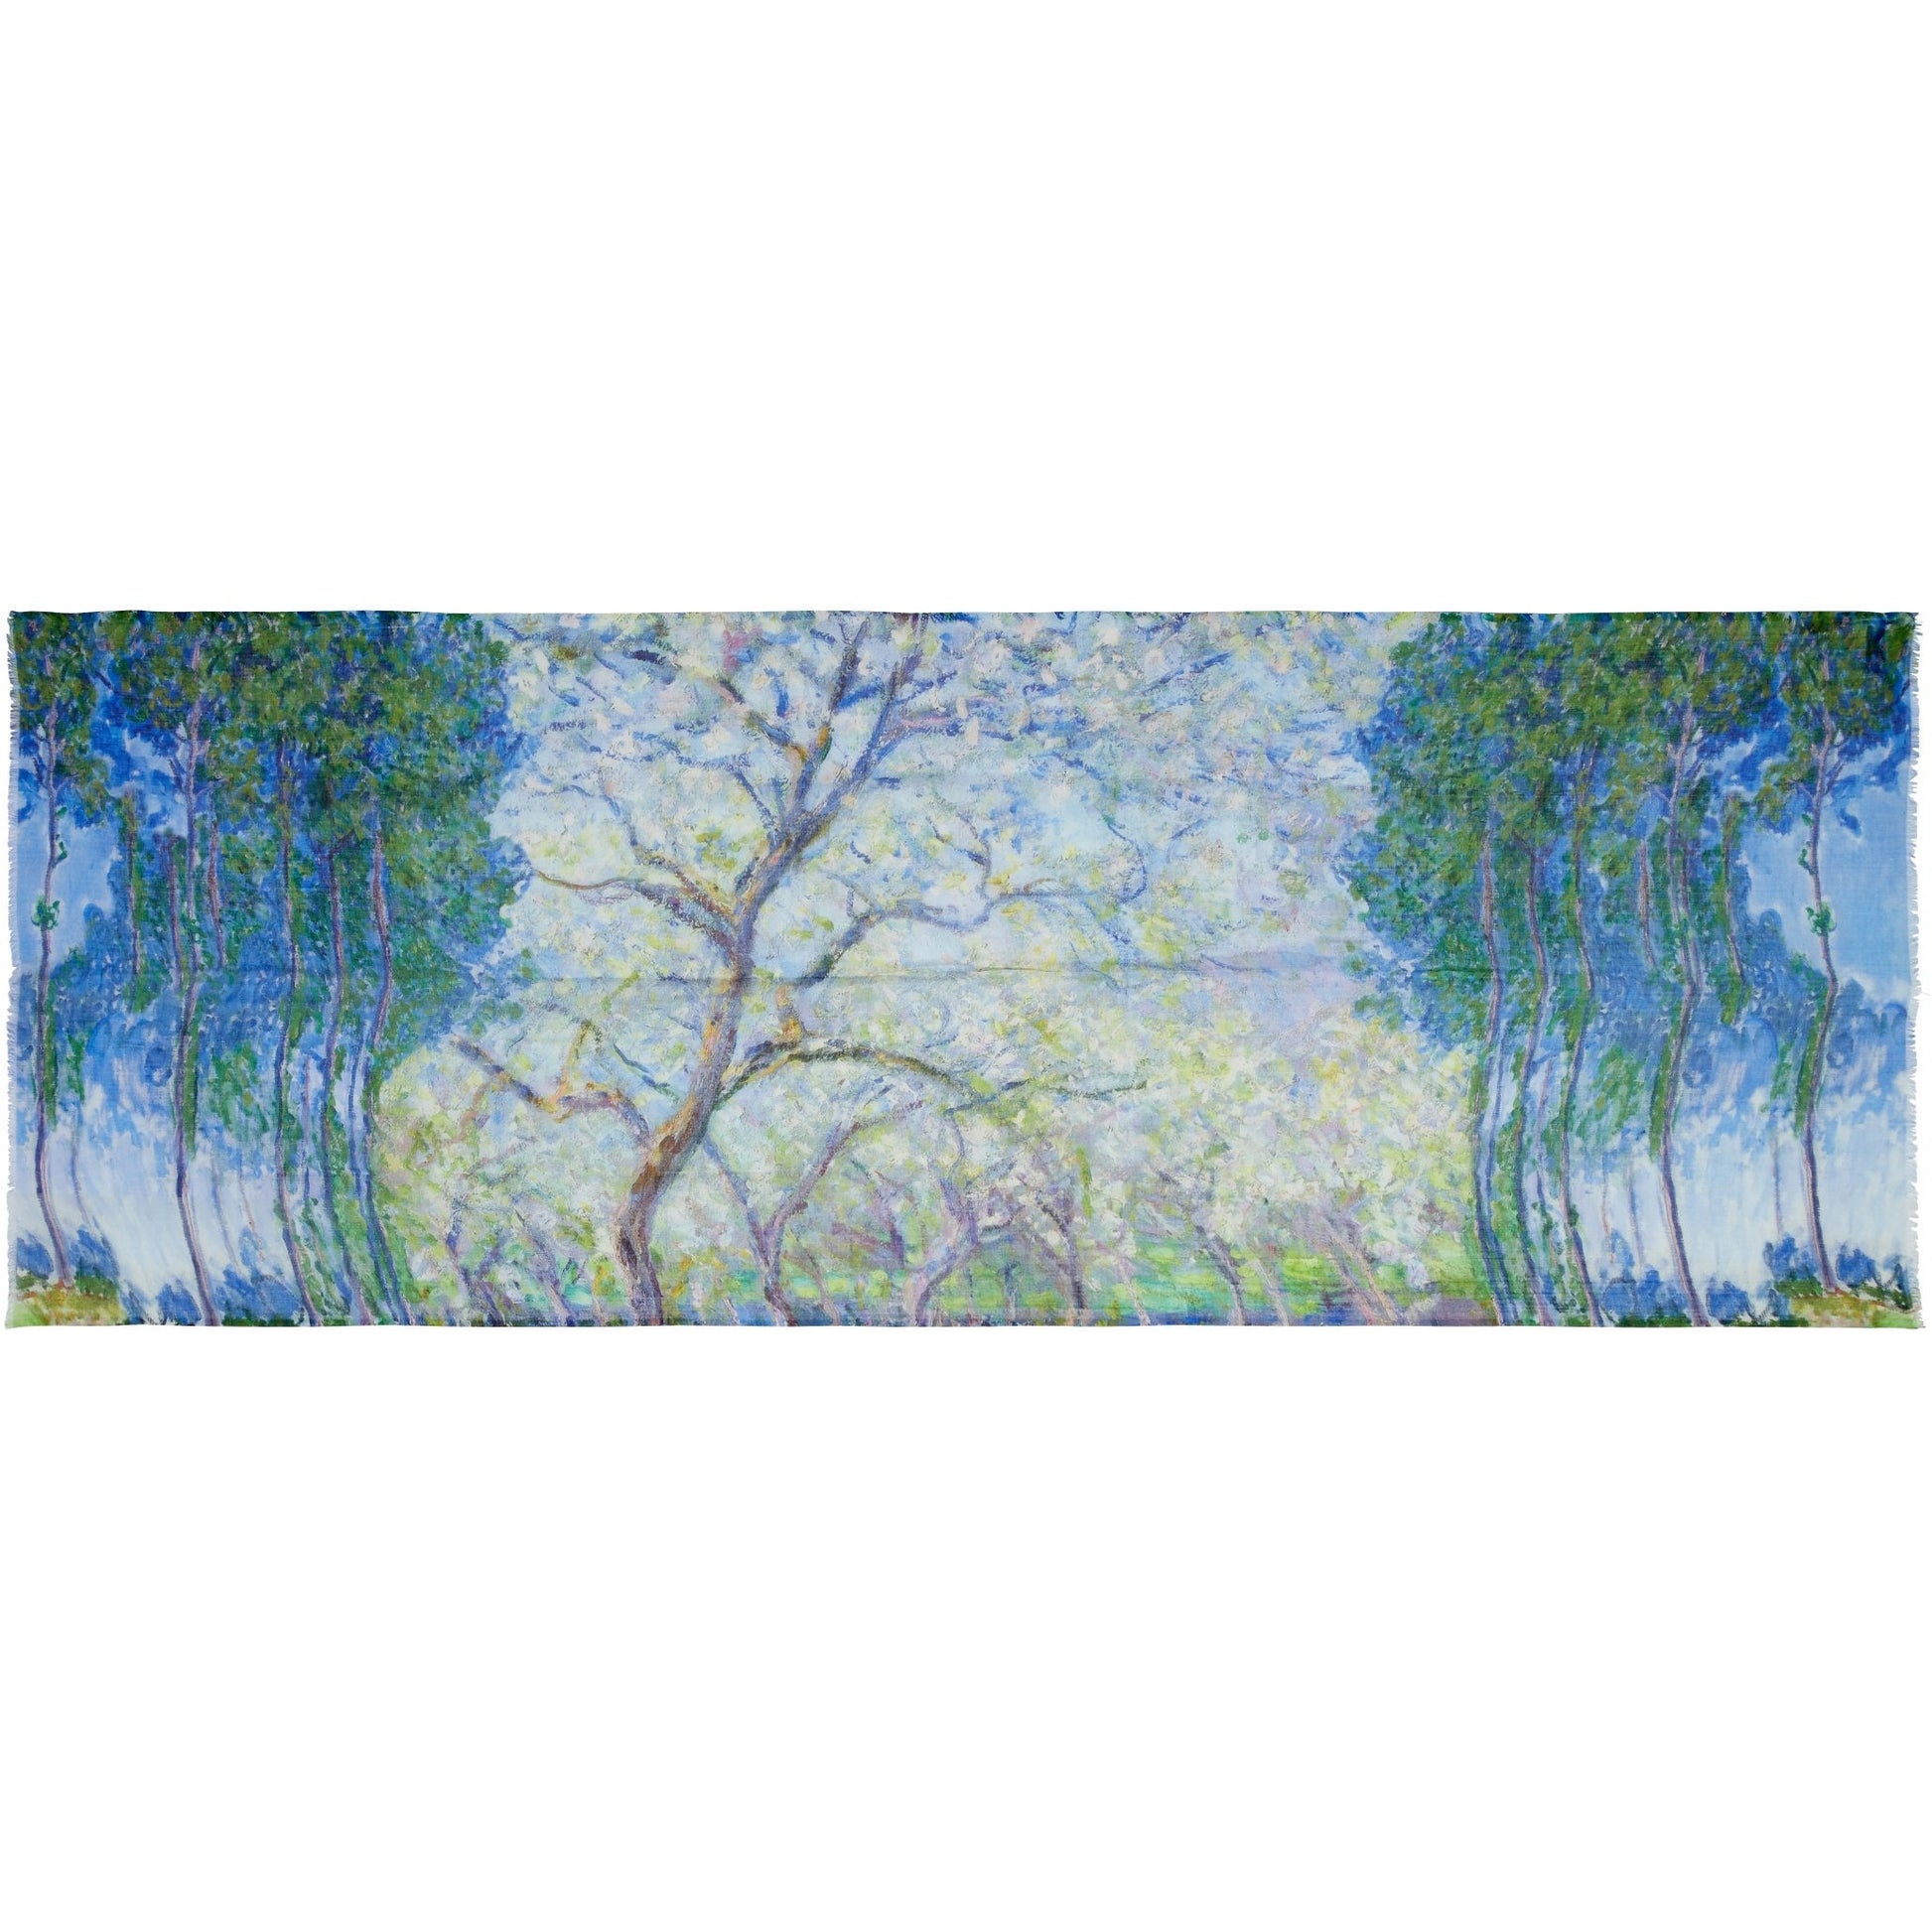 Modal silk scarf with Monet's Trees design (Springtime and Poplars). From the collection of the Fitzwilliam Museum, brought to you by CuratingCambridge.co.uk